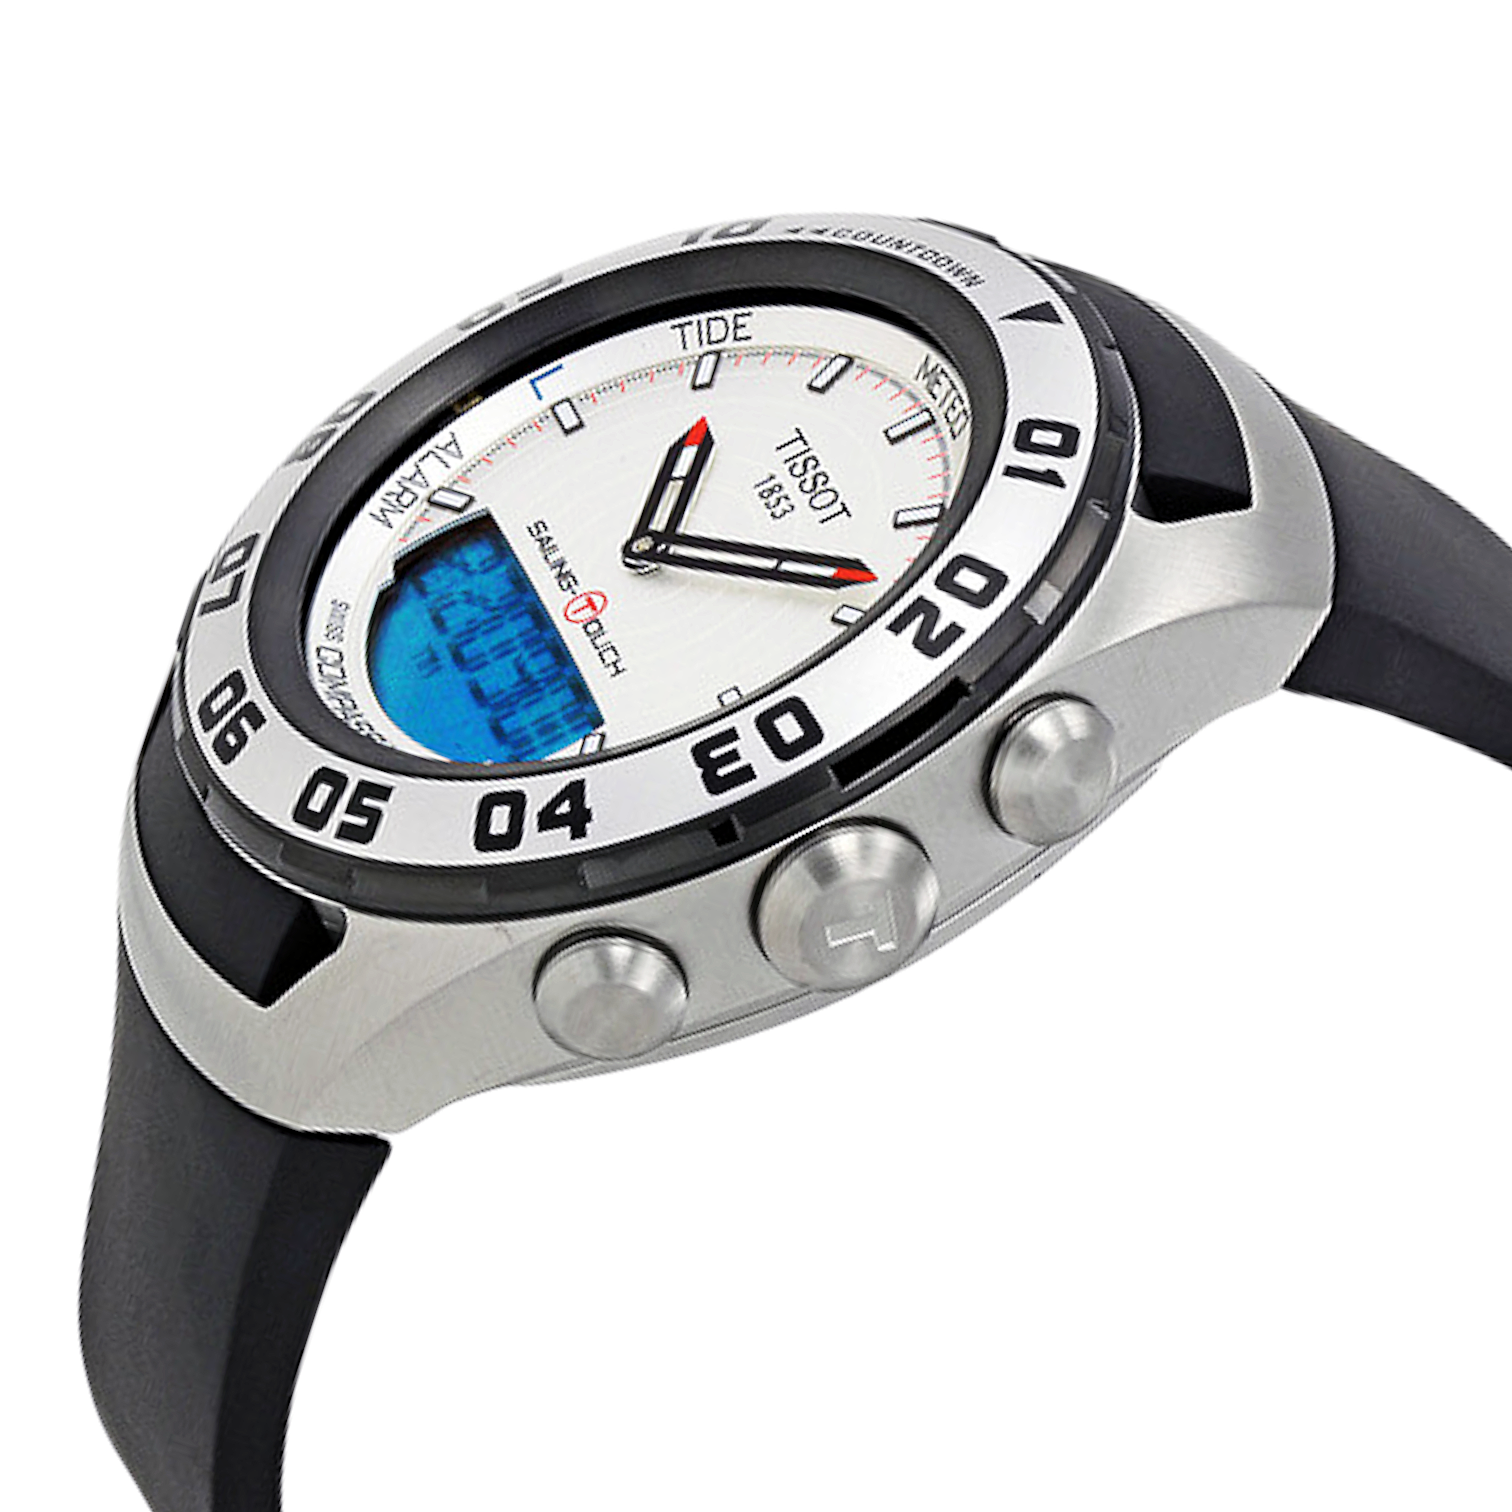 Tissot T-Touch Sailing Ref. T05642027 - ON3896